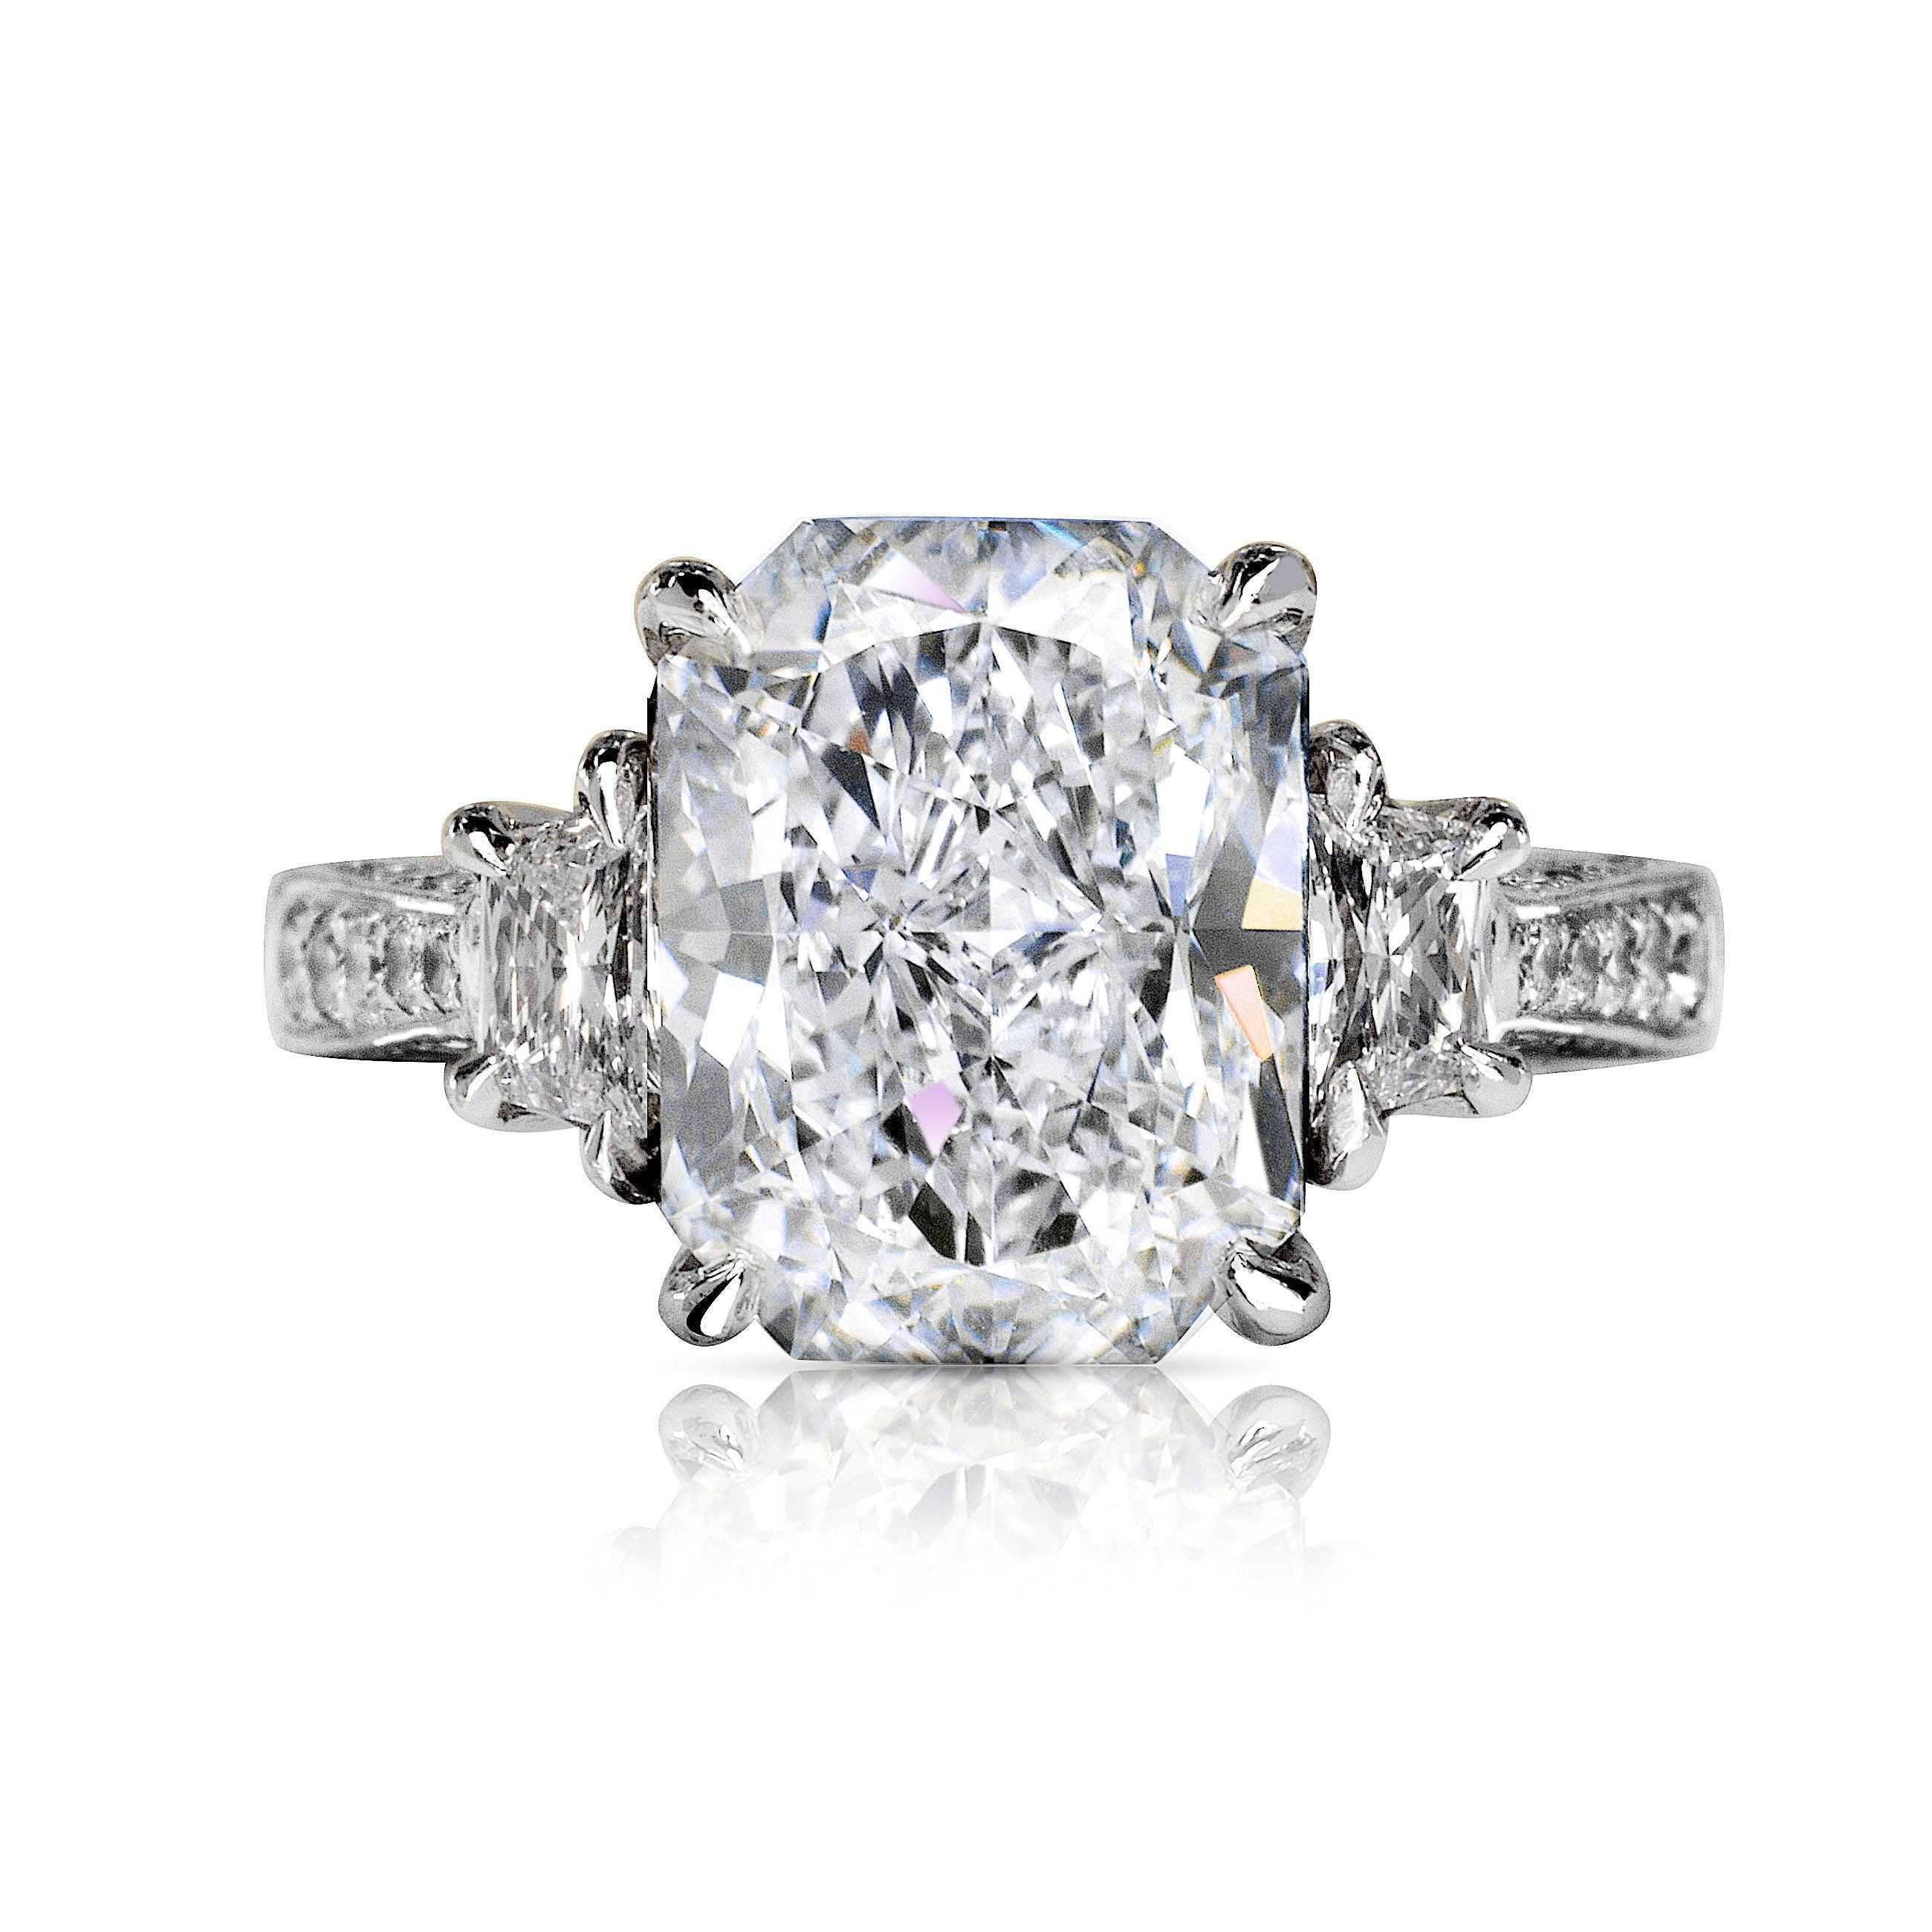 OLIVIA RADIANT FANCY YELLOW DIAMOND ENGAGEMENT RING 14K WHITE GOLD BY MIKE NEKTA
GIA CERTIFIED
 
Center Diamond:
Carat Weight: 5.5 Carats
Color :  F*
Clarity: VVS1
Style:  CUT-CORNERED RECTANGULAR MODIFIED BRILLIANT
Measurements: 11.7 x 8.9 x 5.9